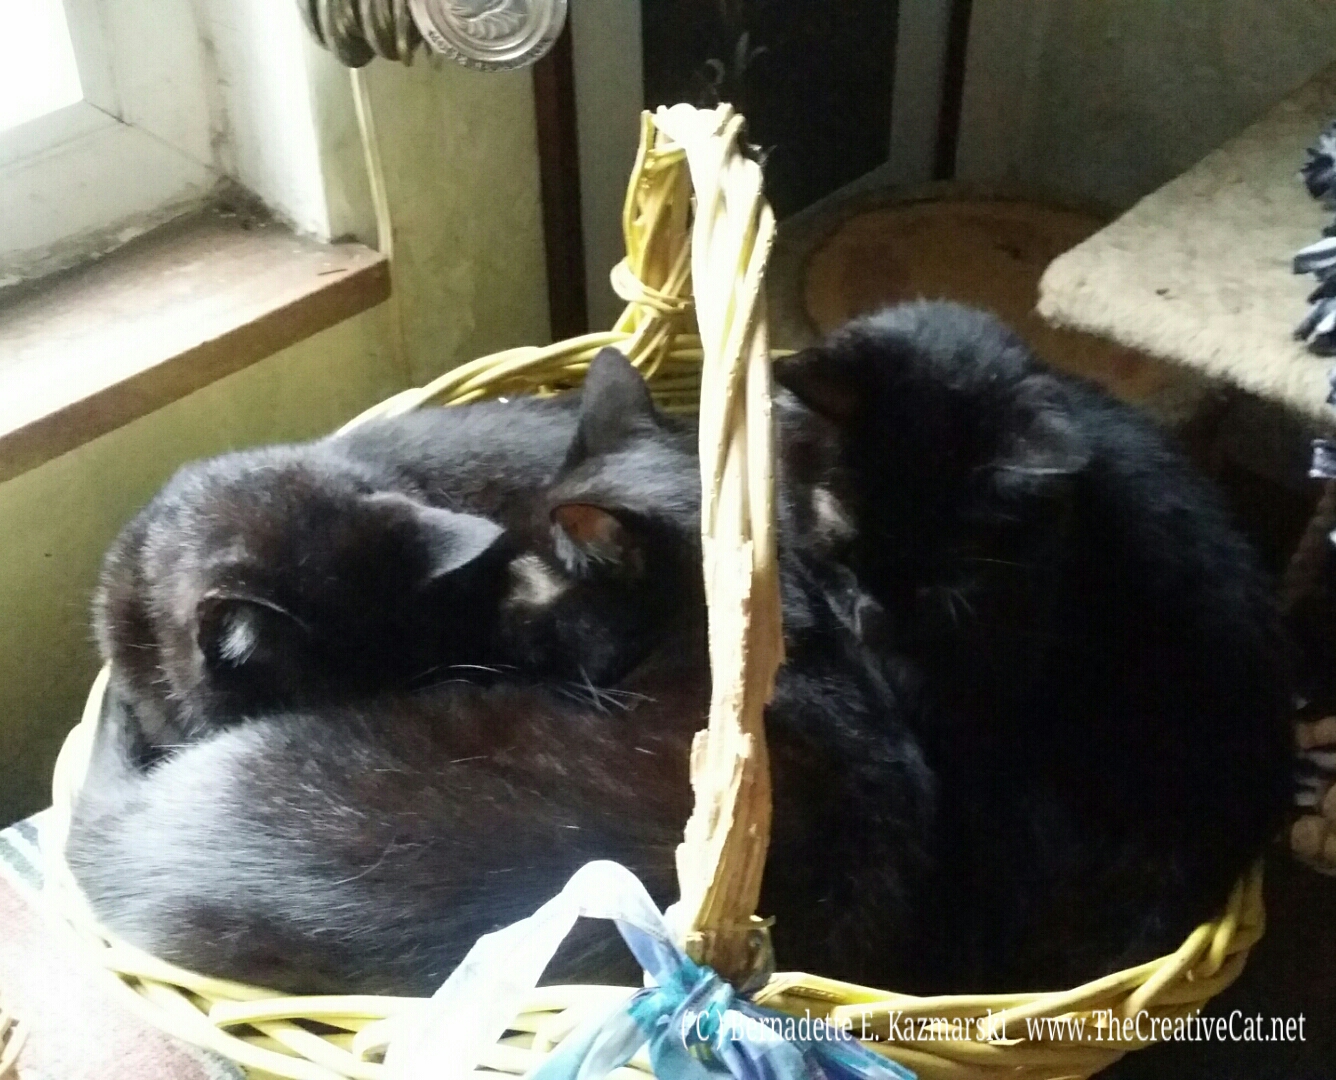 Three brothers in a basket, just right for a rainy day.